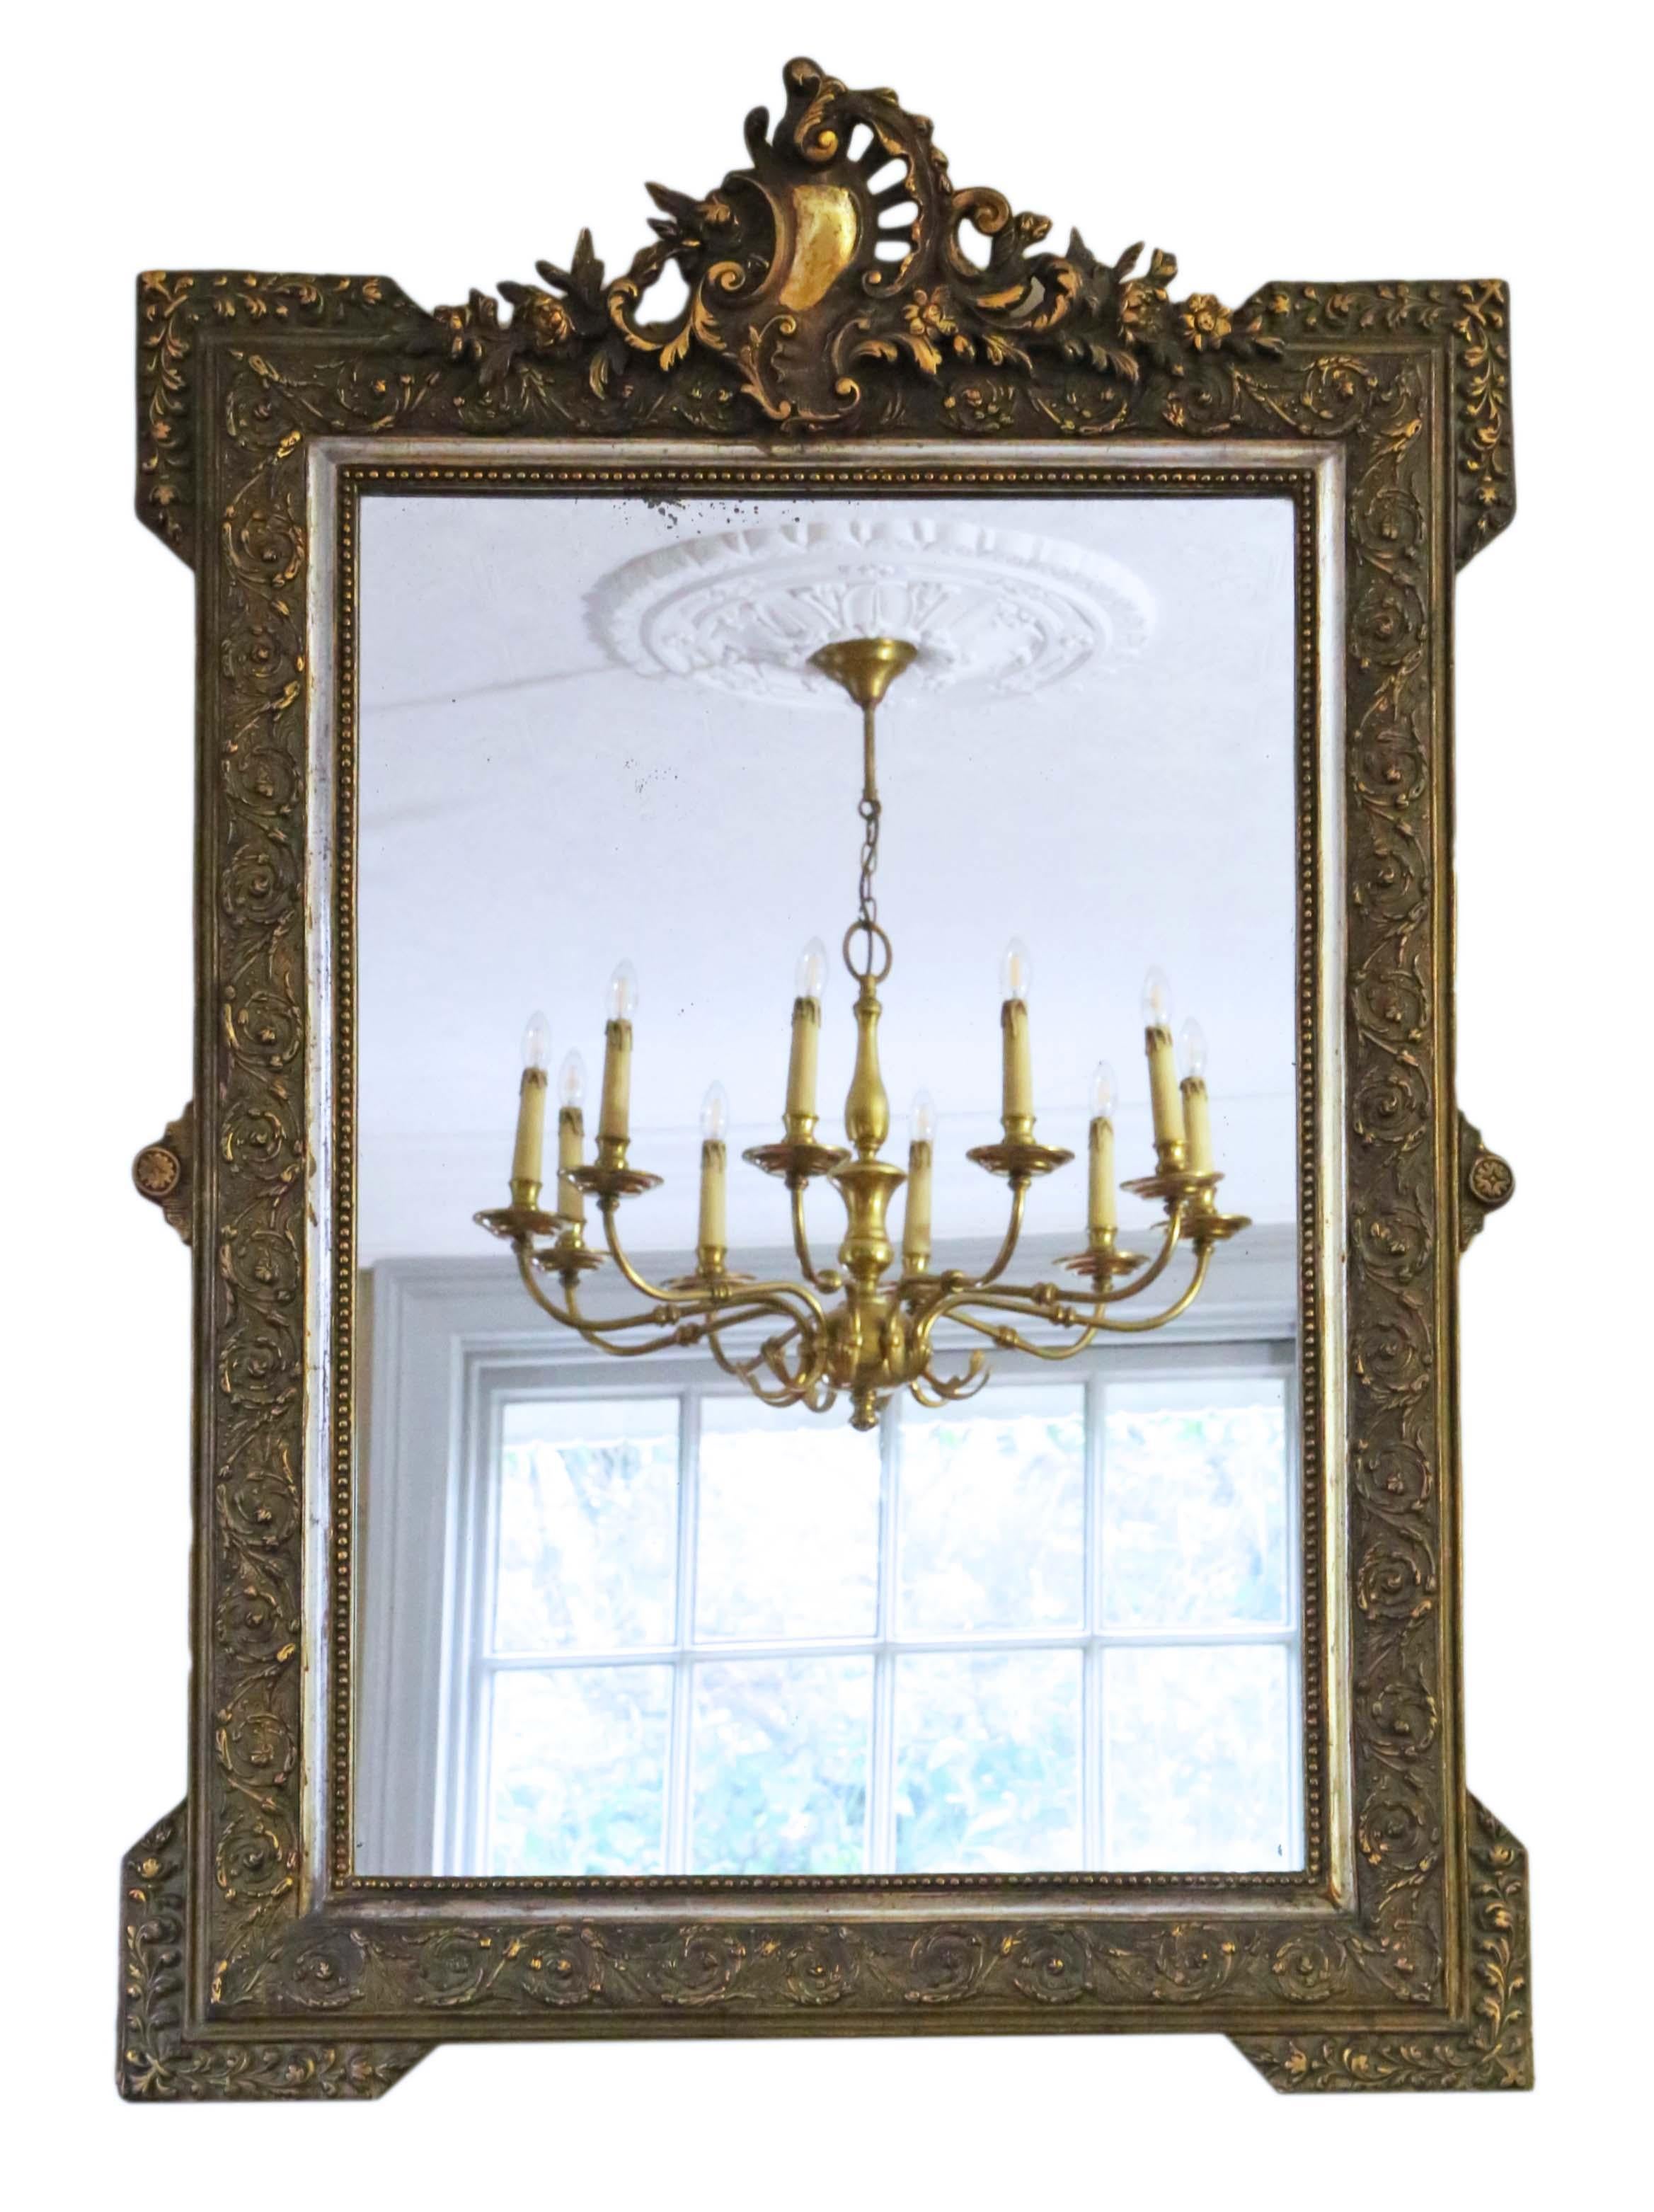 Antique rare large fine quality French 19th century gilt overmantle or wall mirror. The mirror has its original glass and back. The frame has a beautiful original finish with patina, minor losses and touching up.

An impressive find, that would